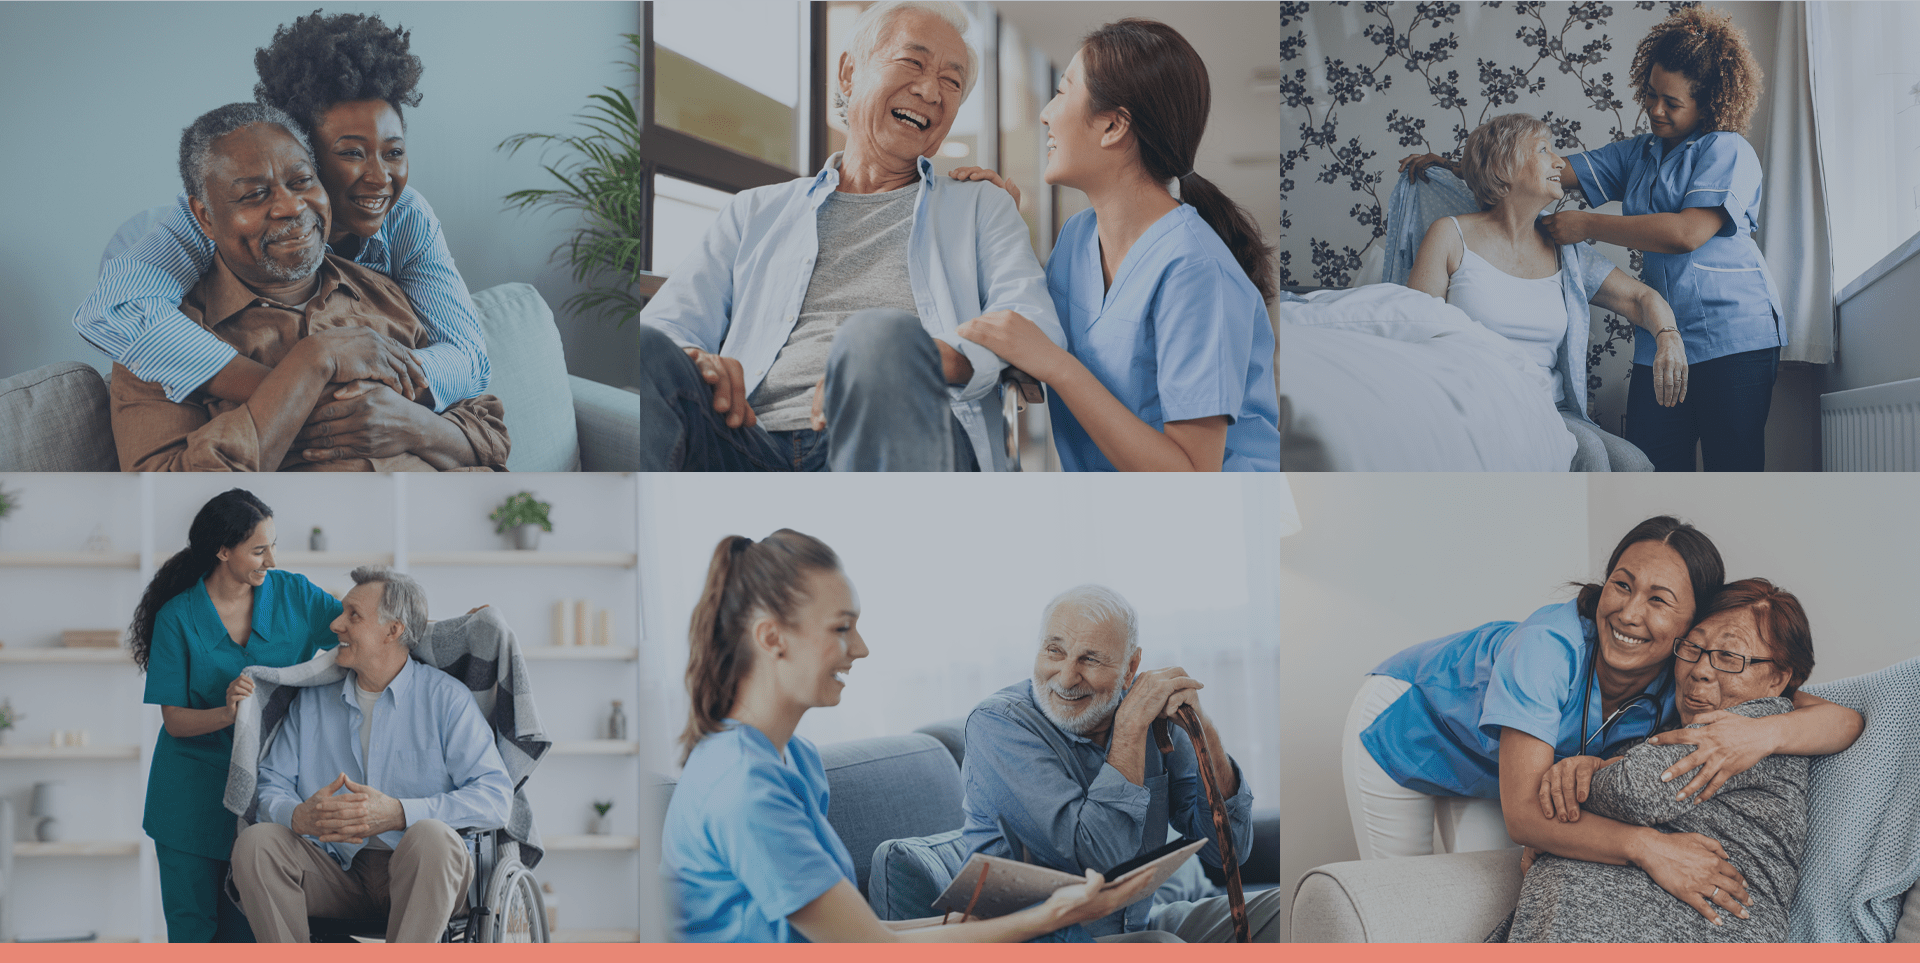 Mosaic of Numerous Images with Home Caregivers and Their Patients